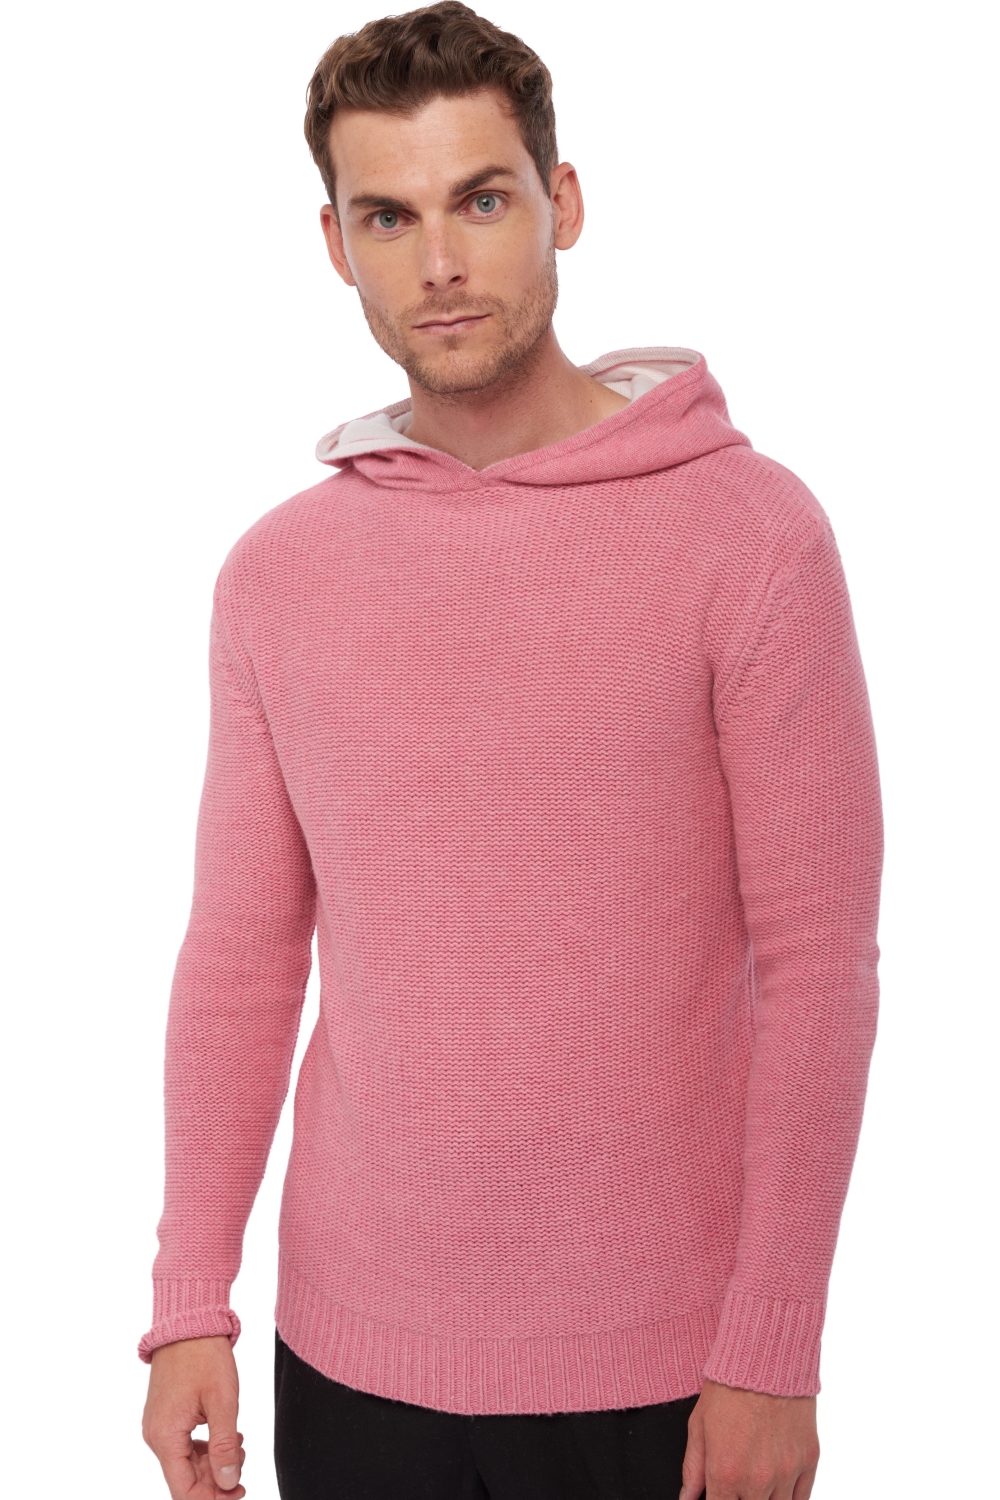 Yak pull homme epais conor pink blanc casse s